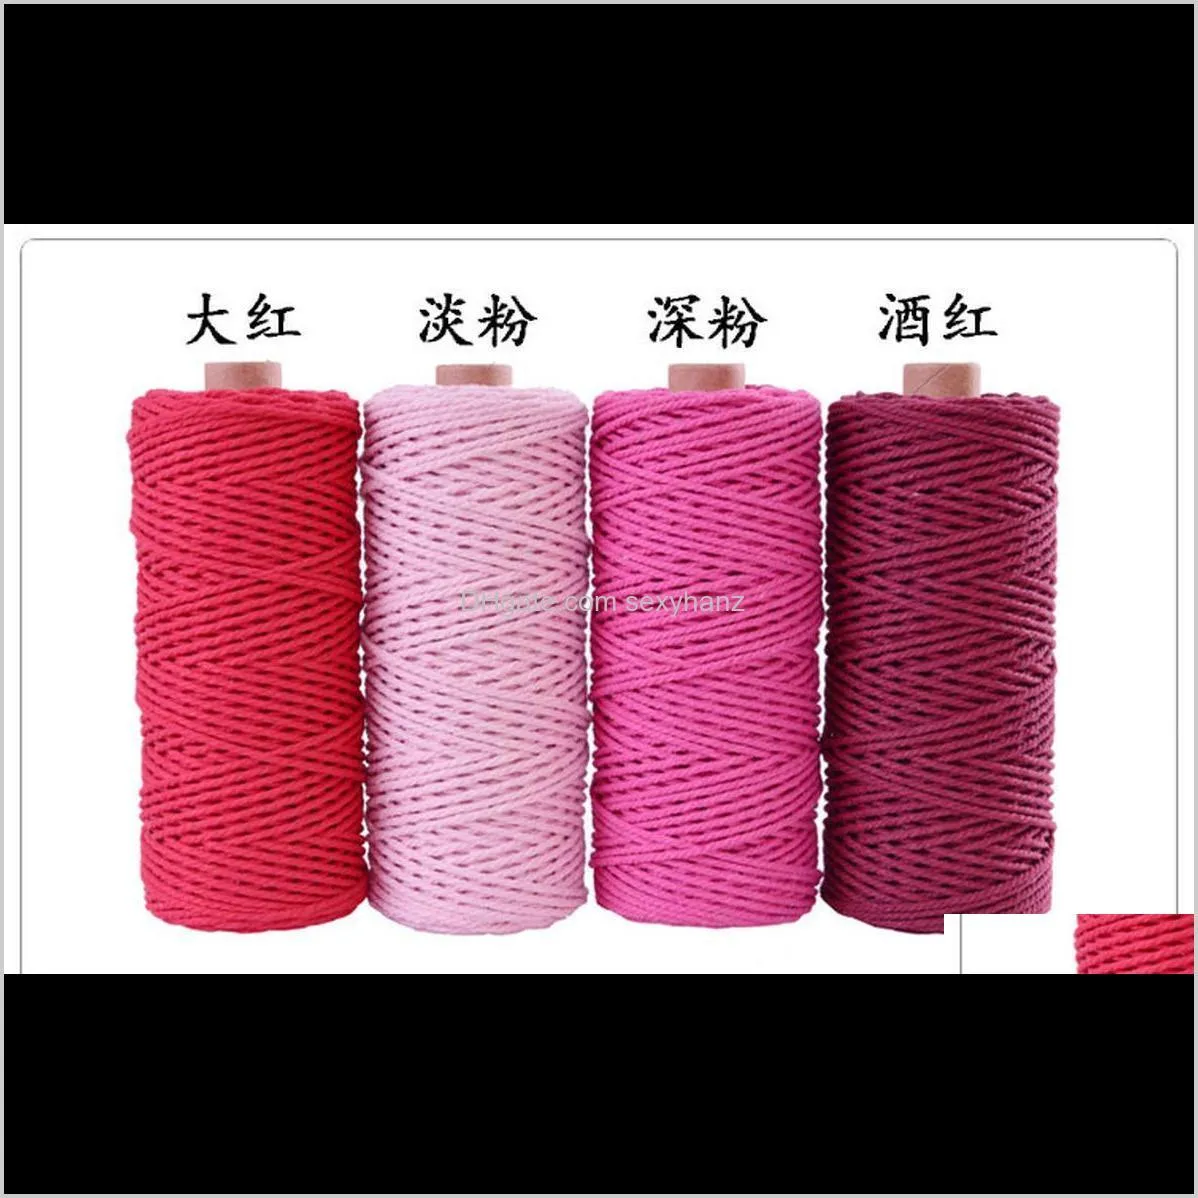 2mm macrame 100% cotton cord colorful cord rope beige twisted craft string diy home textile wedding decorative supply 110yards1